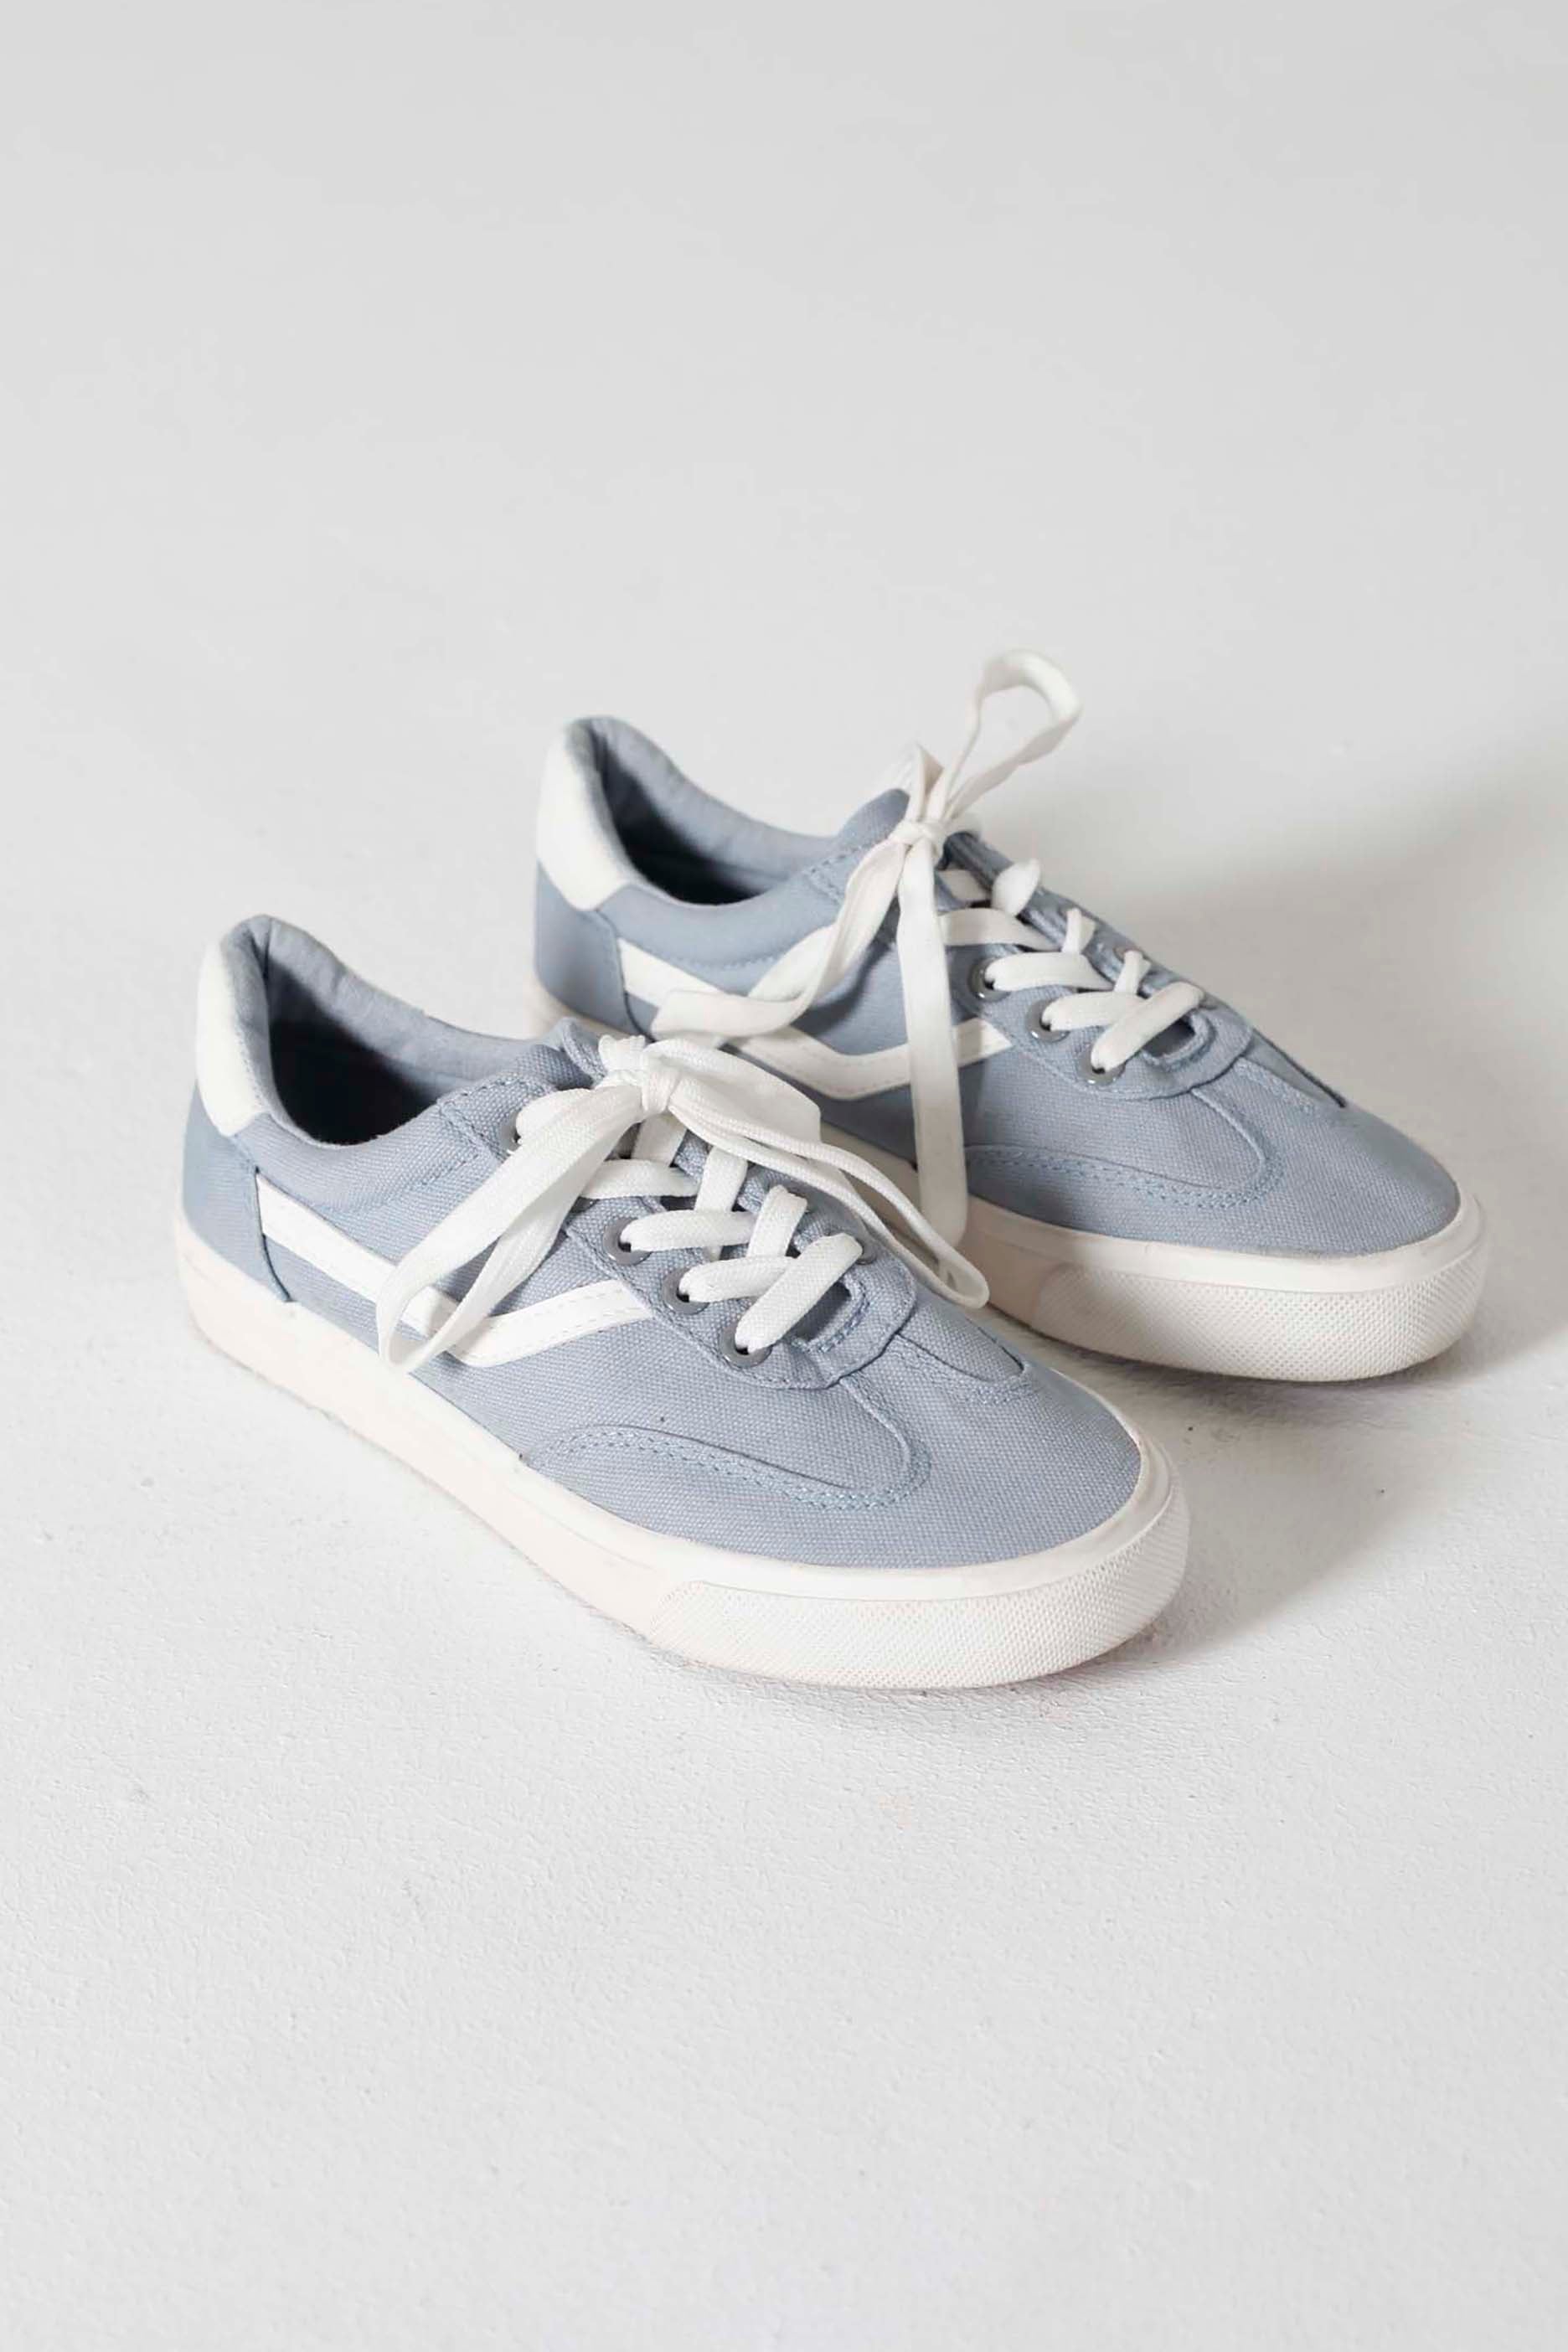 Blue/White Lace-Up Sneaker